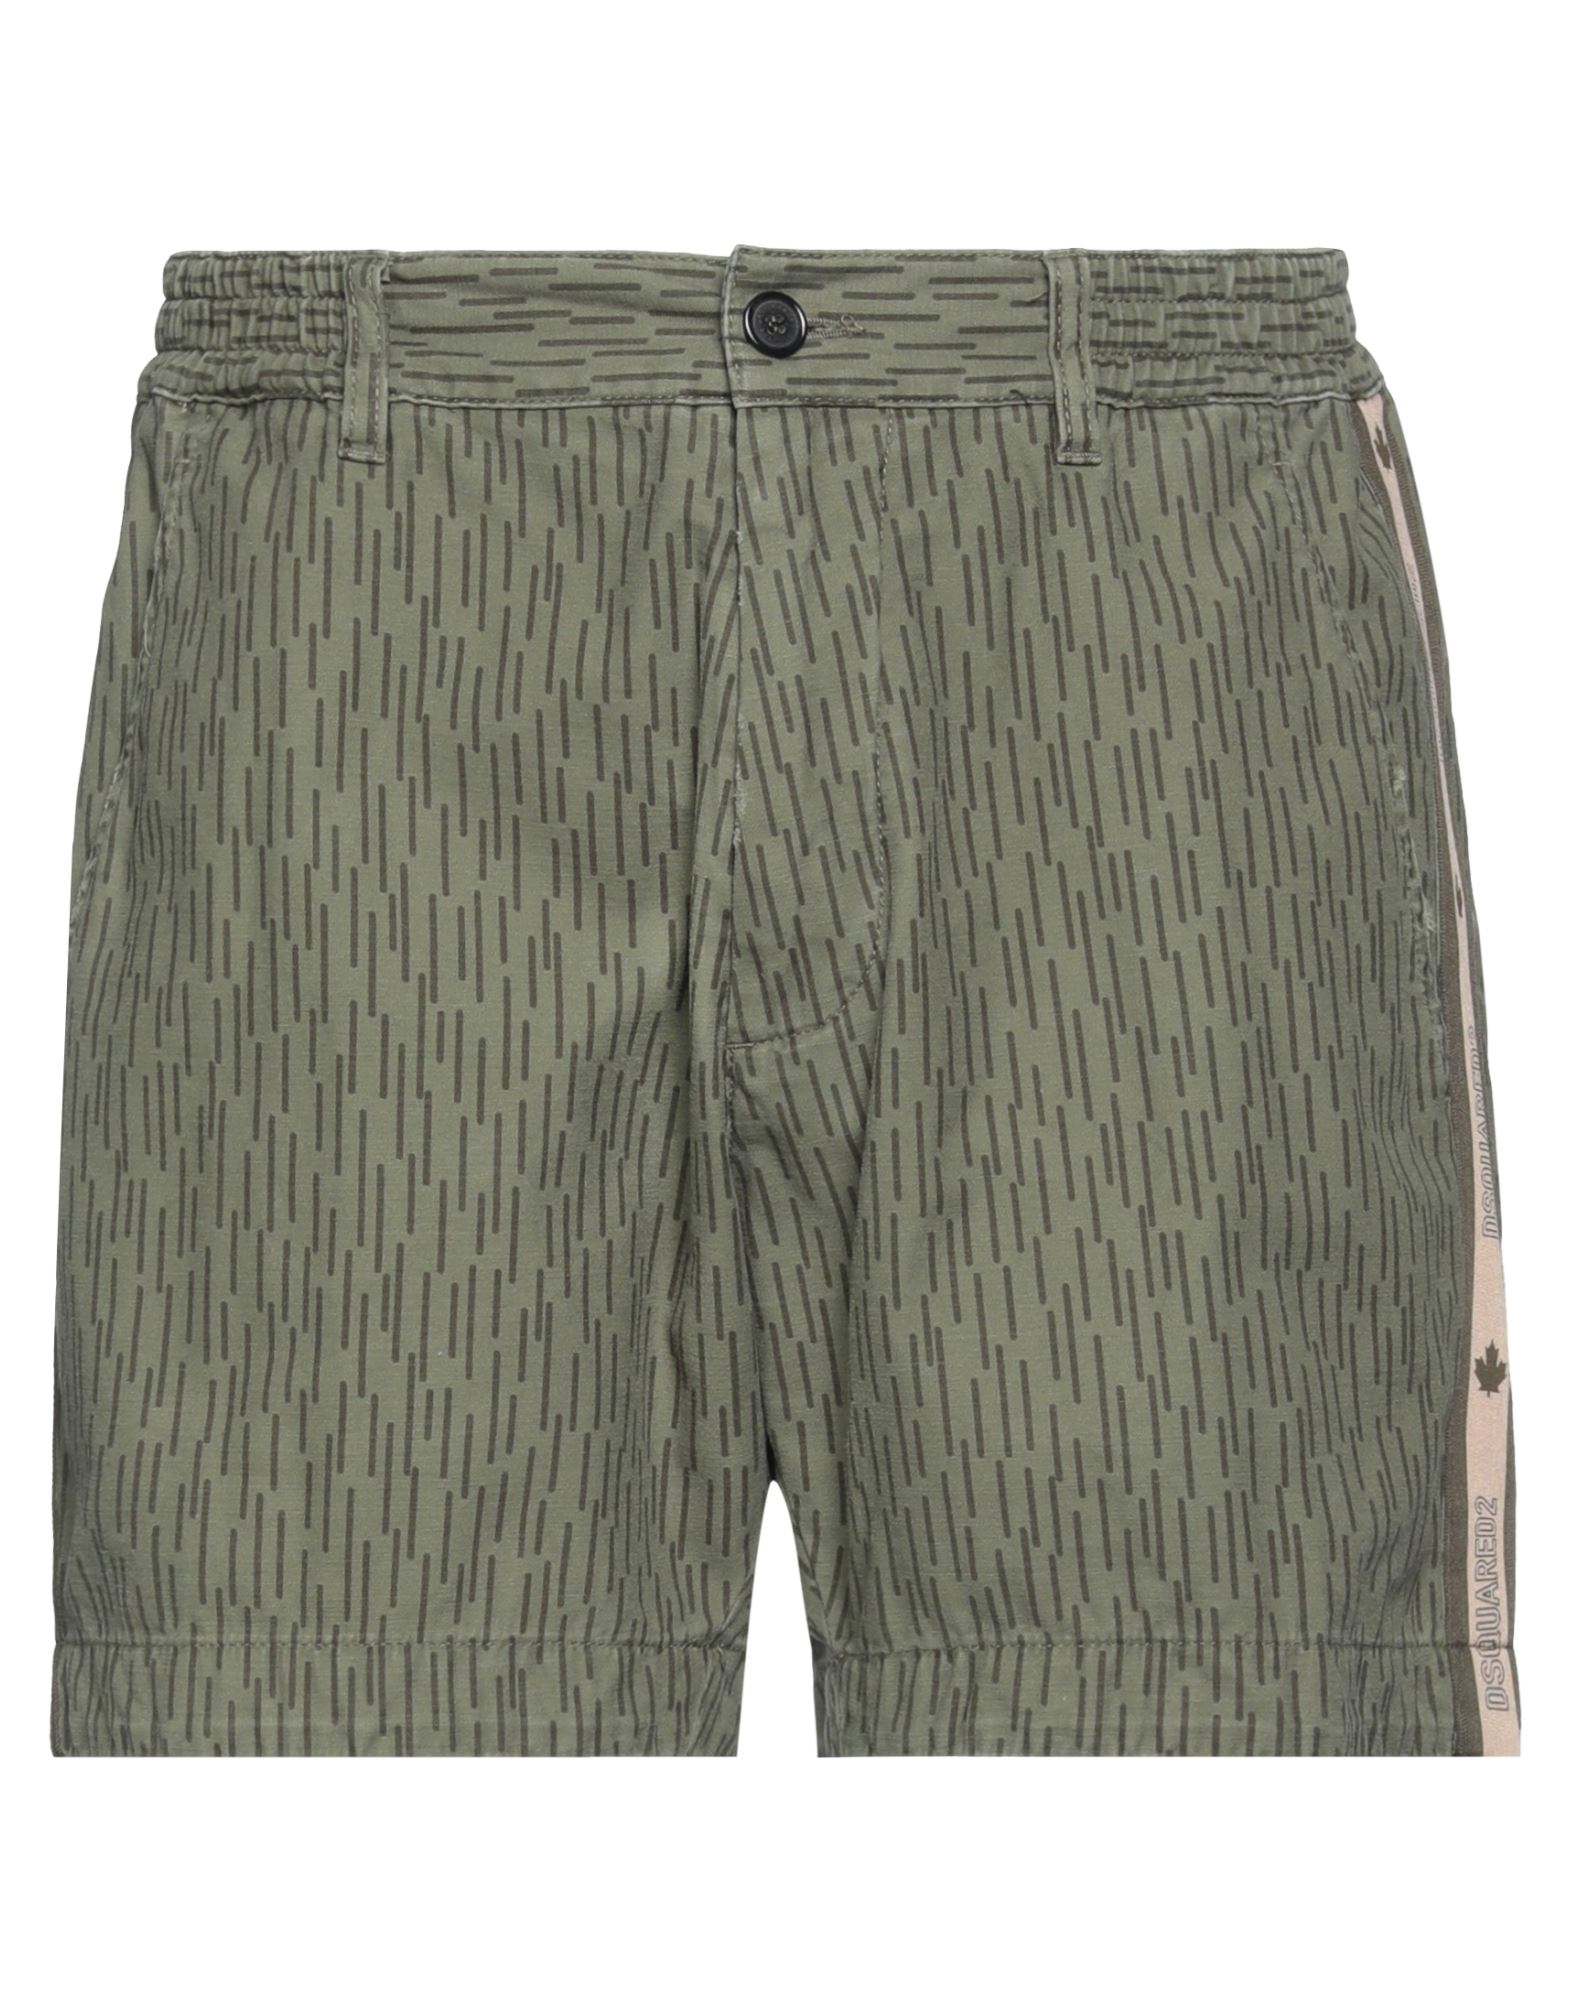 Dsquared2 Man Shorts & Bermuda Shorts Military Green Size 32 Cotton, Polyester